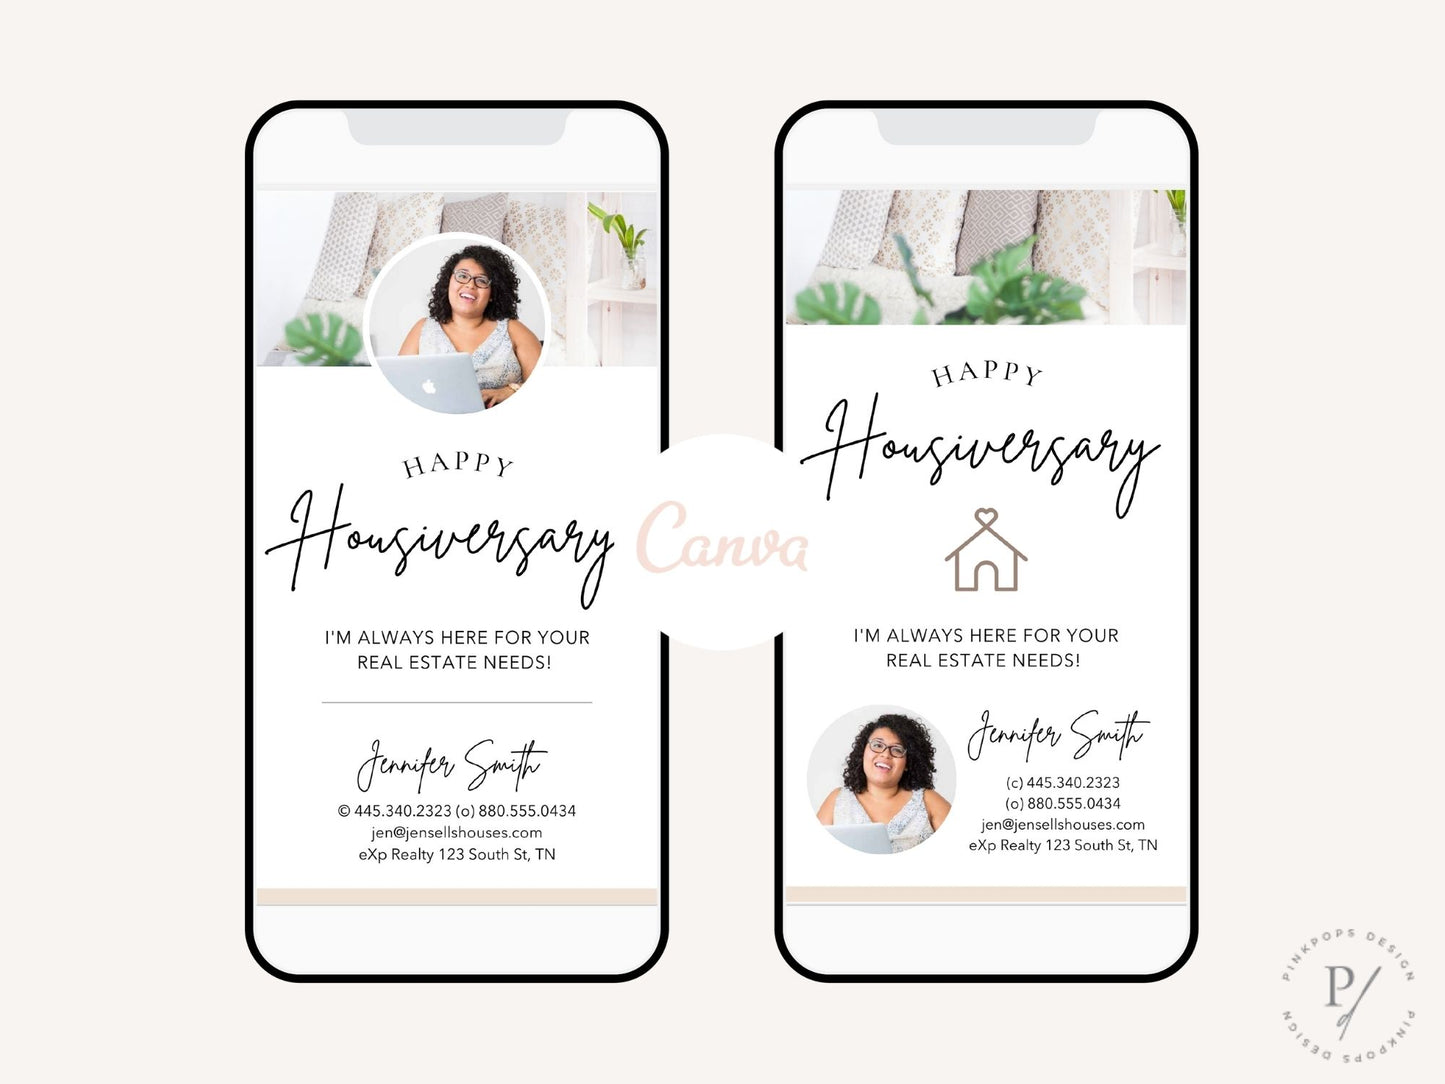 Real Estate Textable Happy Housiversary - Celebrate homeownership milestones with a digital greeting tool for sending personalized and convenient well wishes on the anniversary of a home purchase.